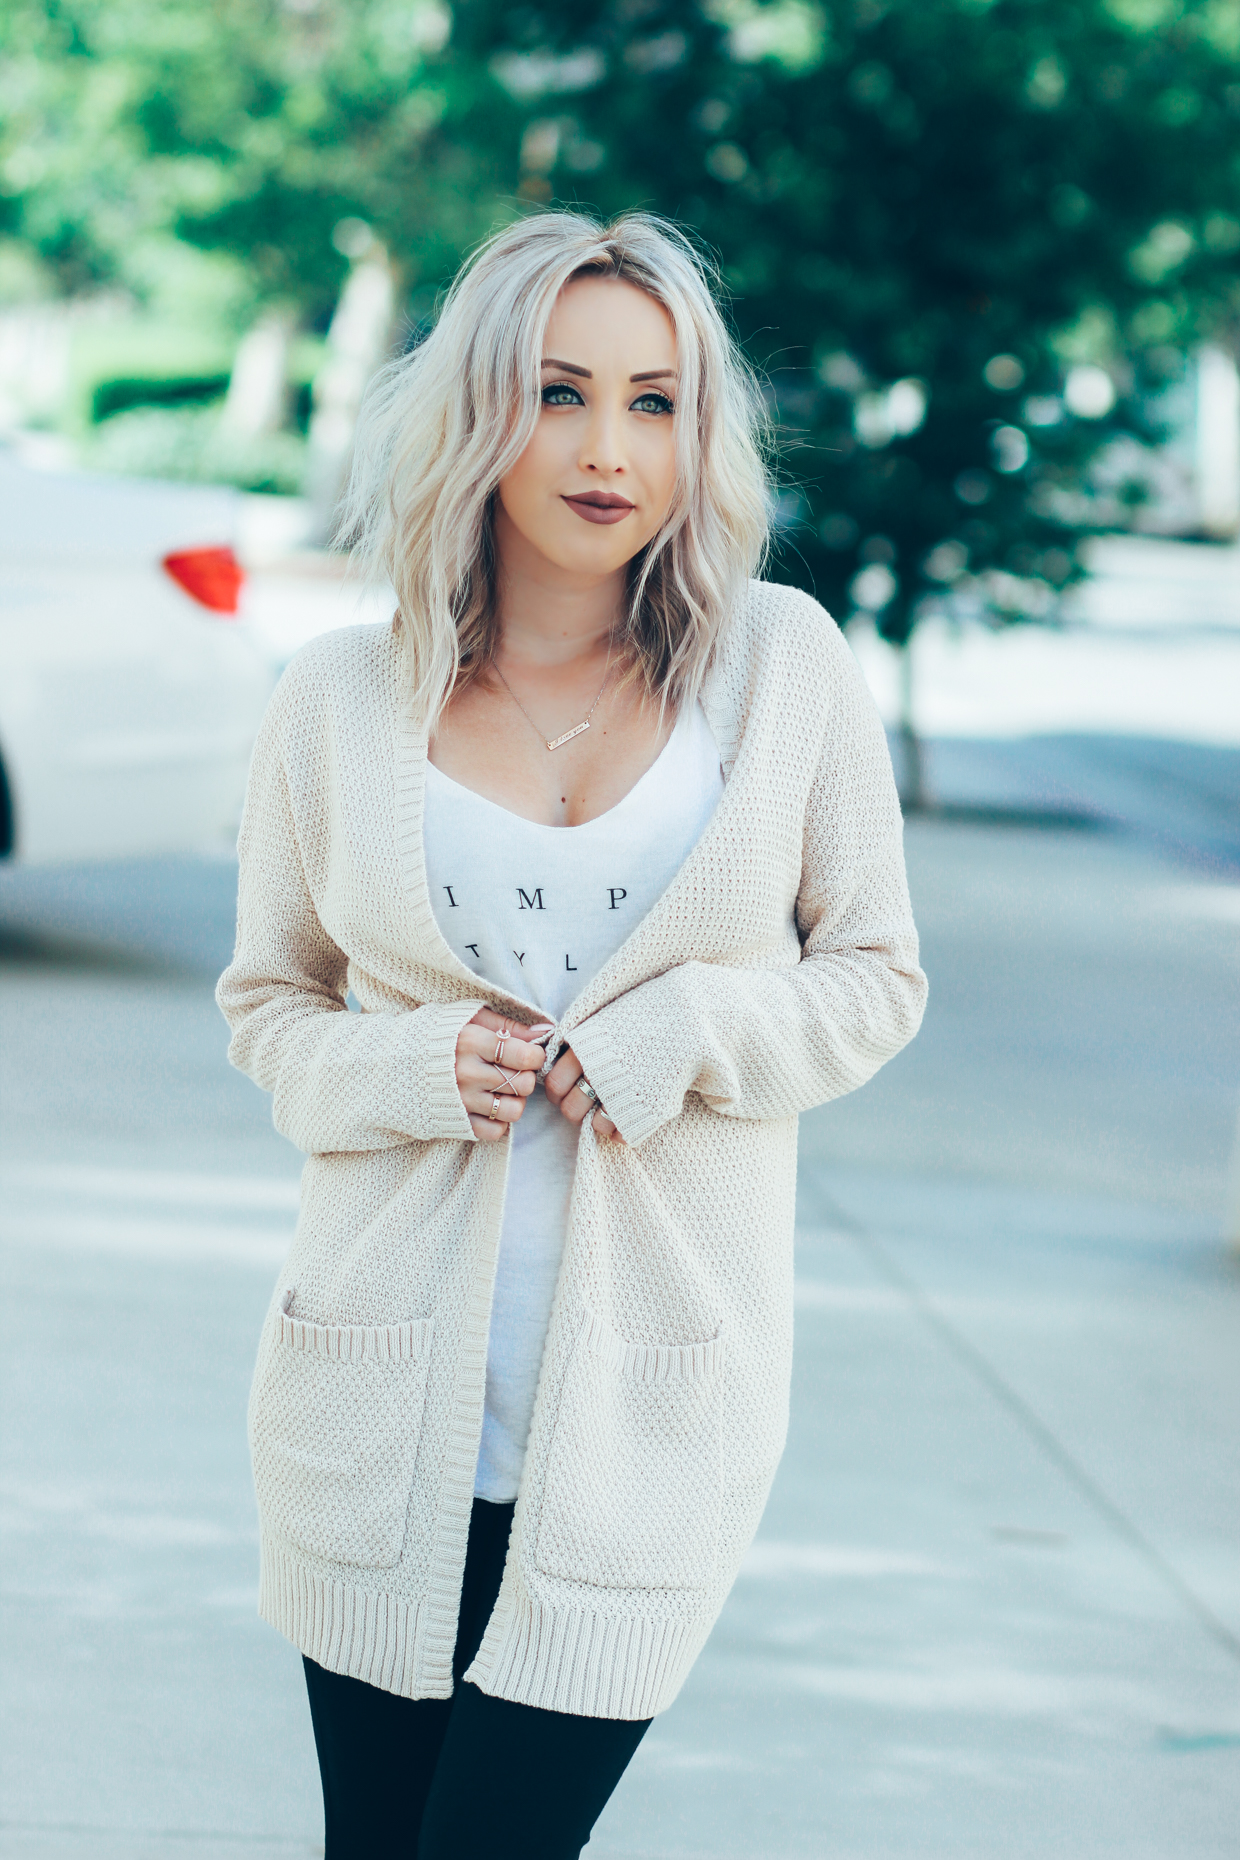 Blondie in the City | Casual #OOTD | Distressed Jeans | "A $60 Cardigan That Is Totally Worth The Splurge" @urbanoutfitters